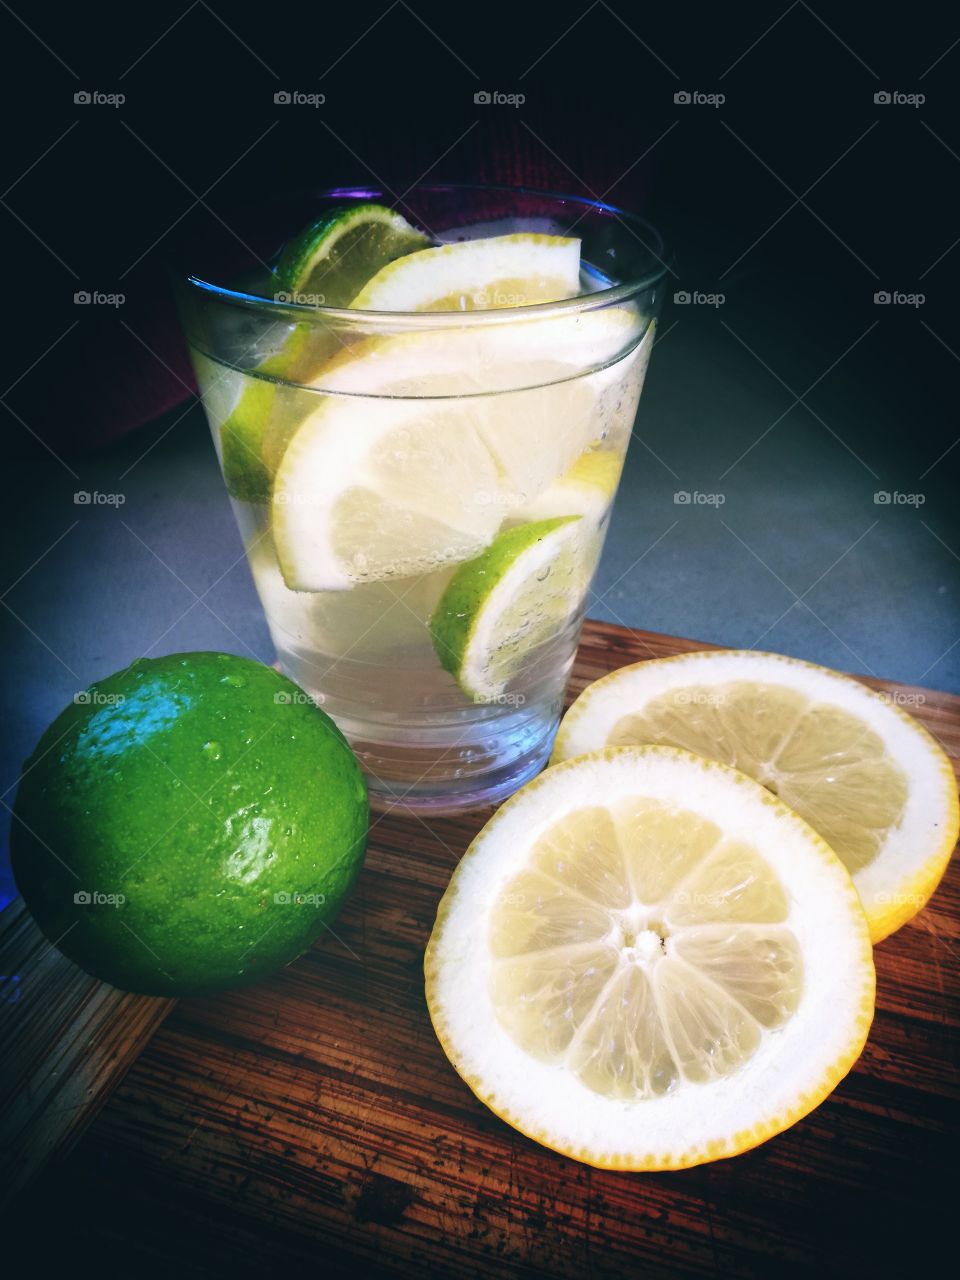 Green color story - Citrus fruit in water